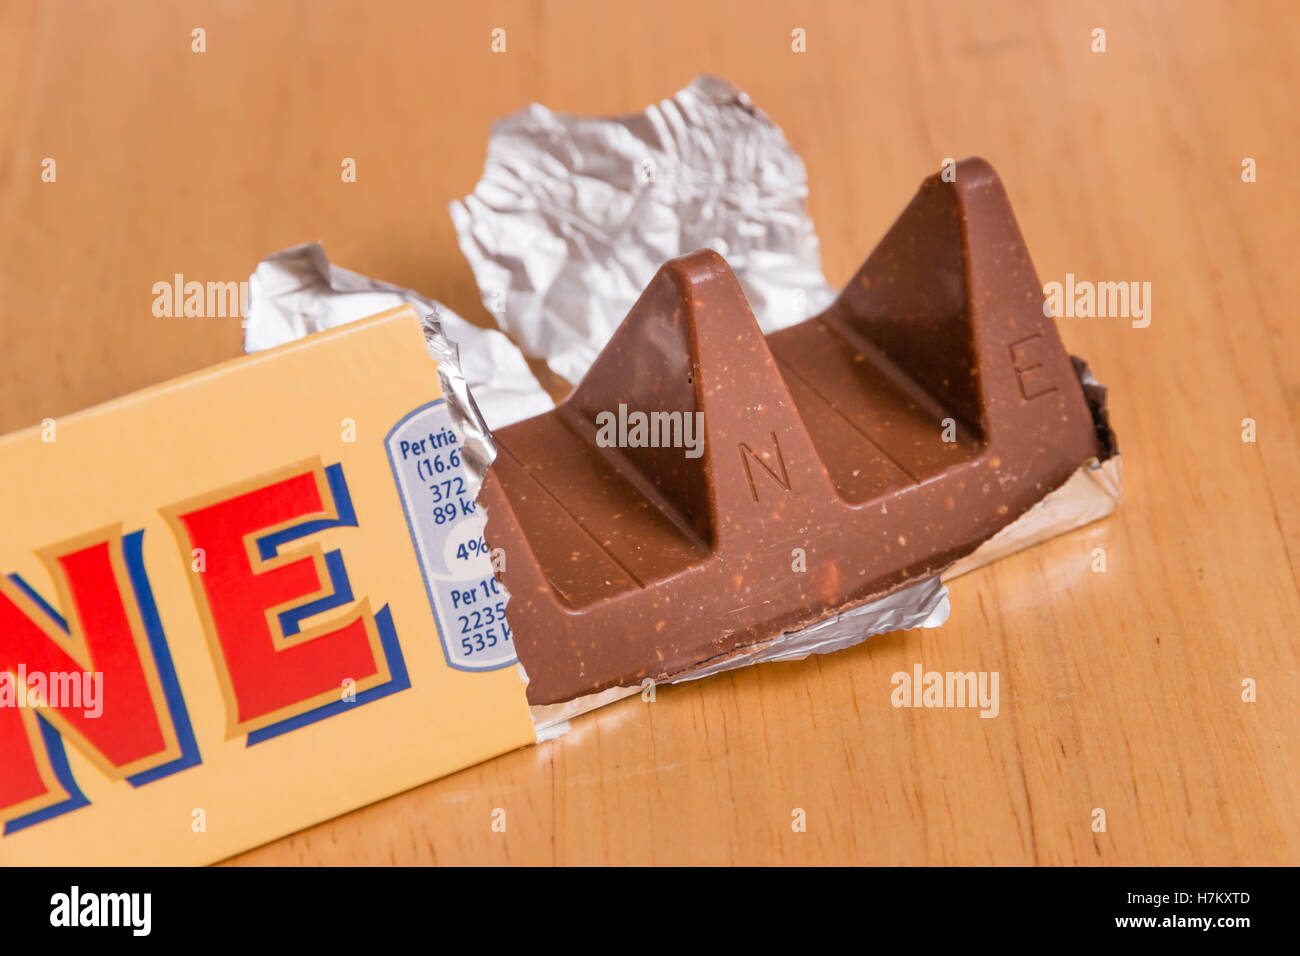 A close up of the wider gaps between pieces of a 150g Toblerone. Stock Photo